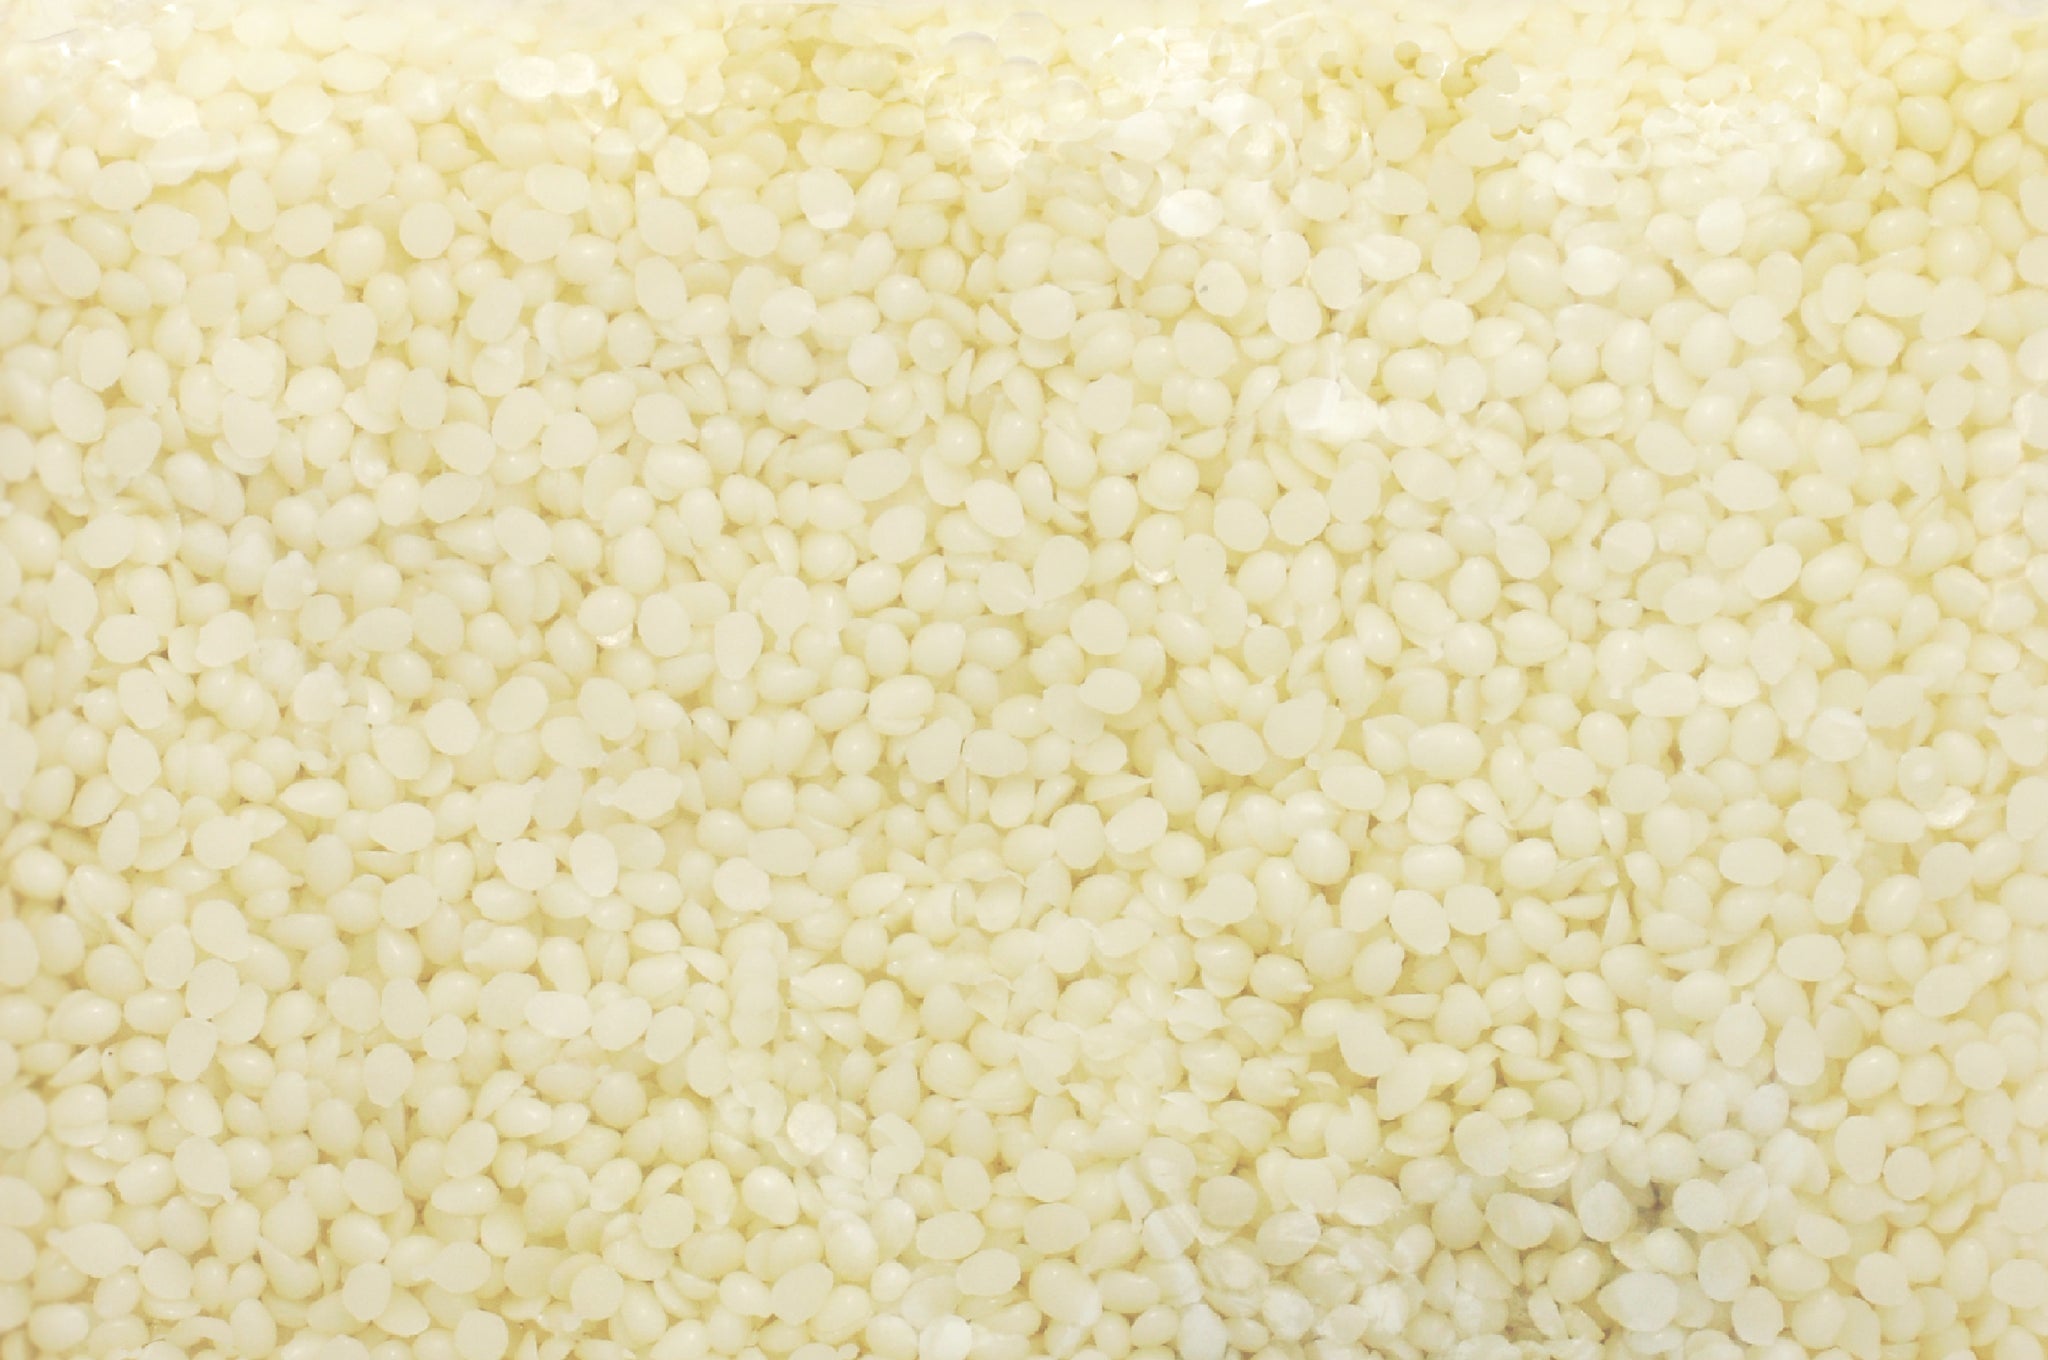 White Beeswax Pellets For Sale